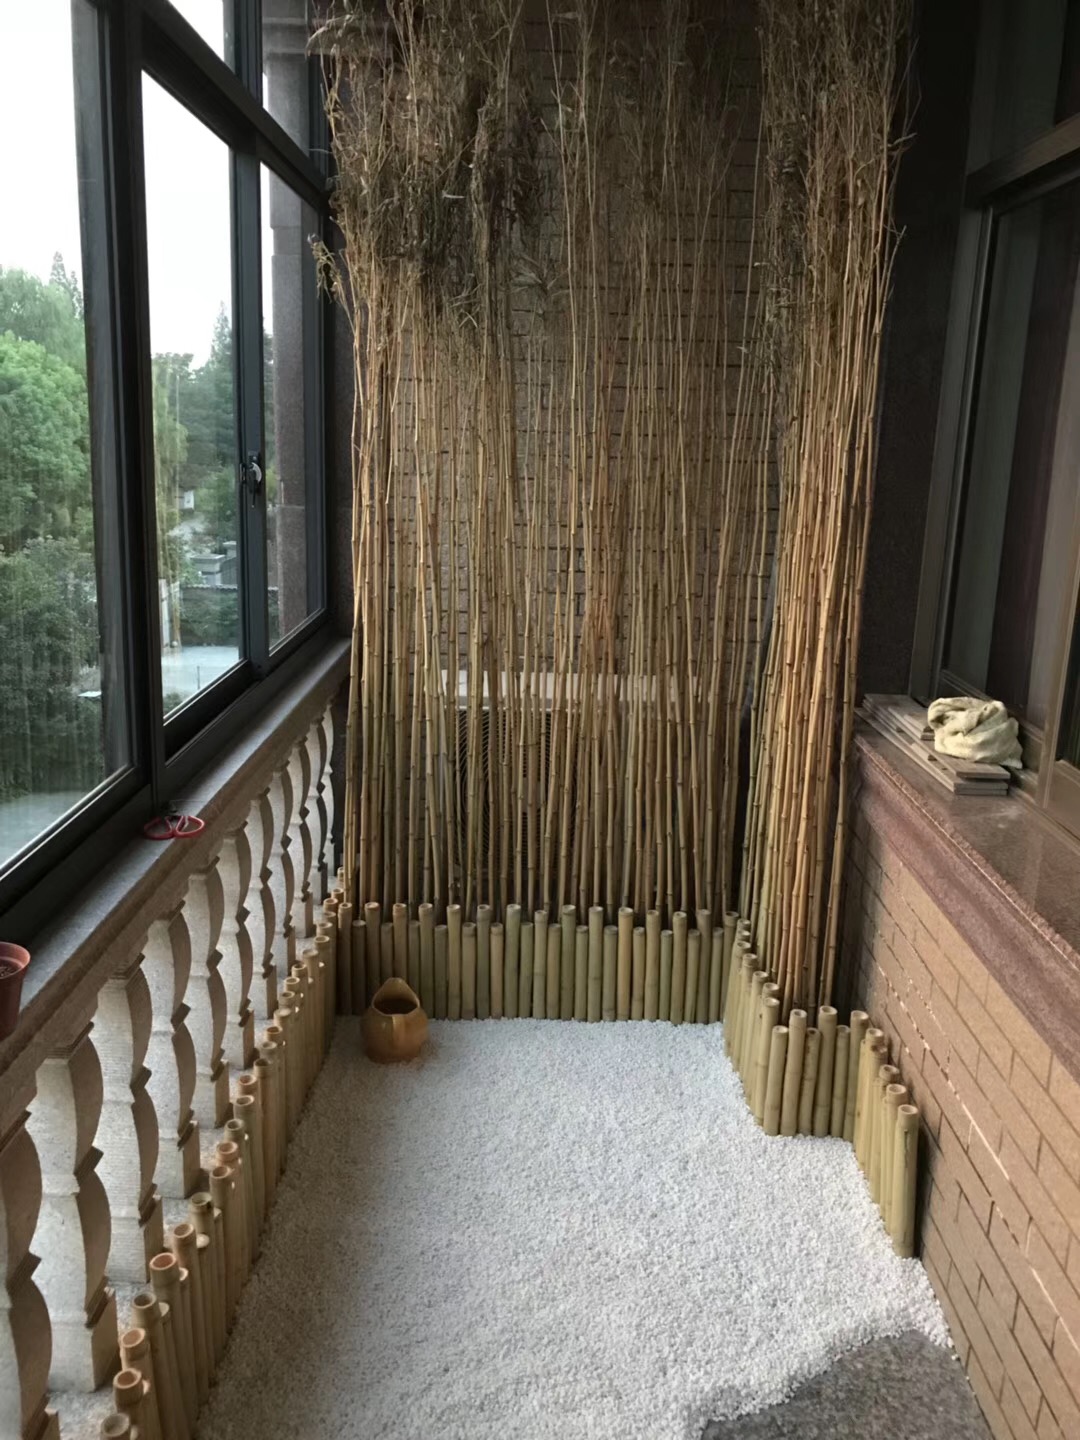 Manufacturer wholesale natural bamboo to make black and natural color bamboo fence garden fence